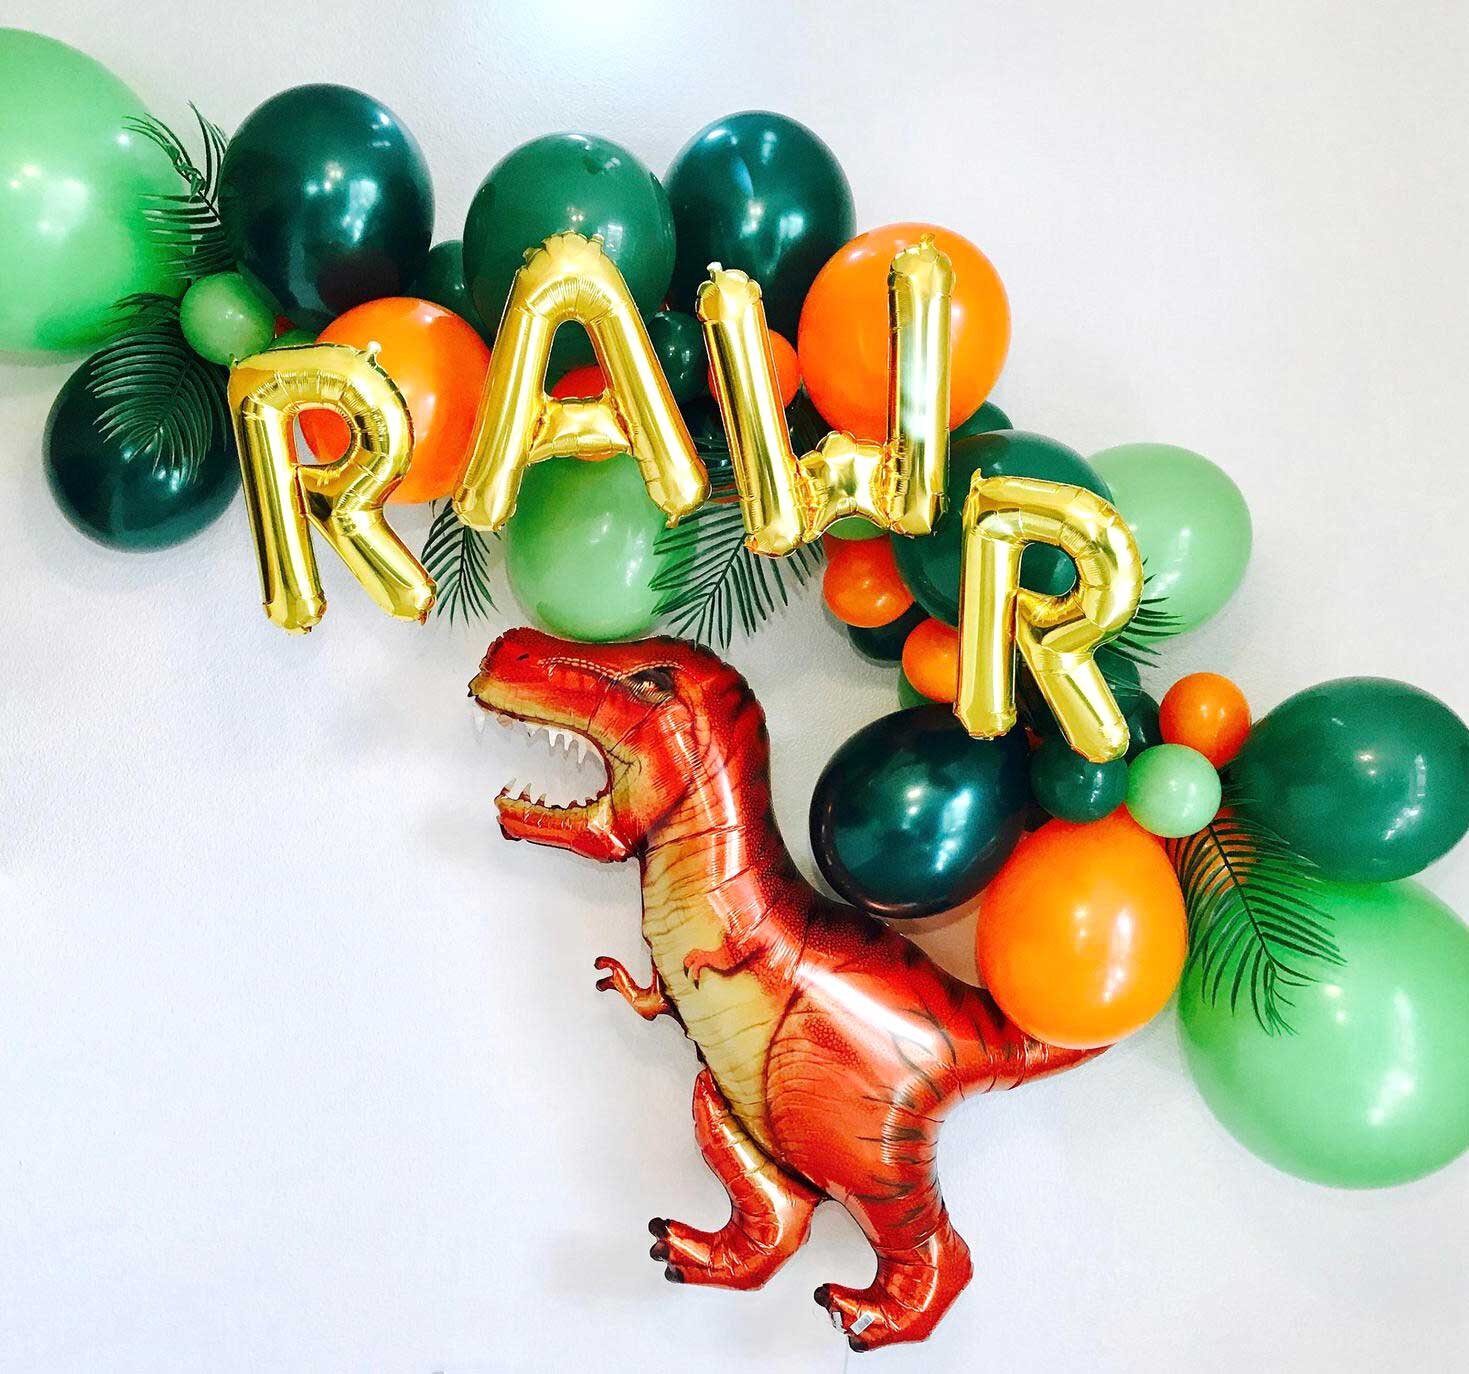 Dinosaur Birthday Party Decoration 105 Pcs of Set Dinosaur Themed Party Favors Include Dinosaurs Balloons Paper Pompoms Flower Great For Your Kids Party Happy Birthday Balloons,Backdrop